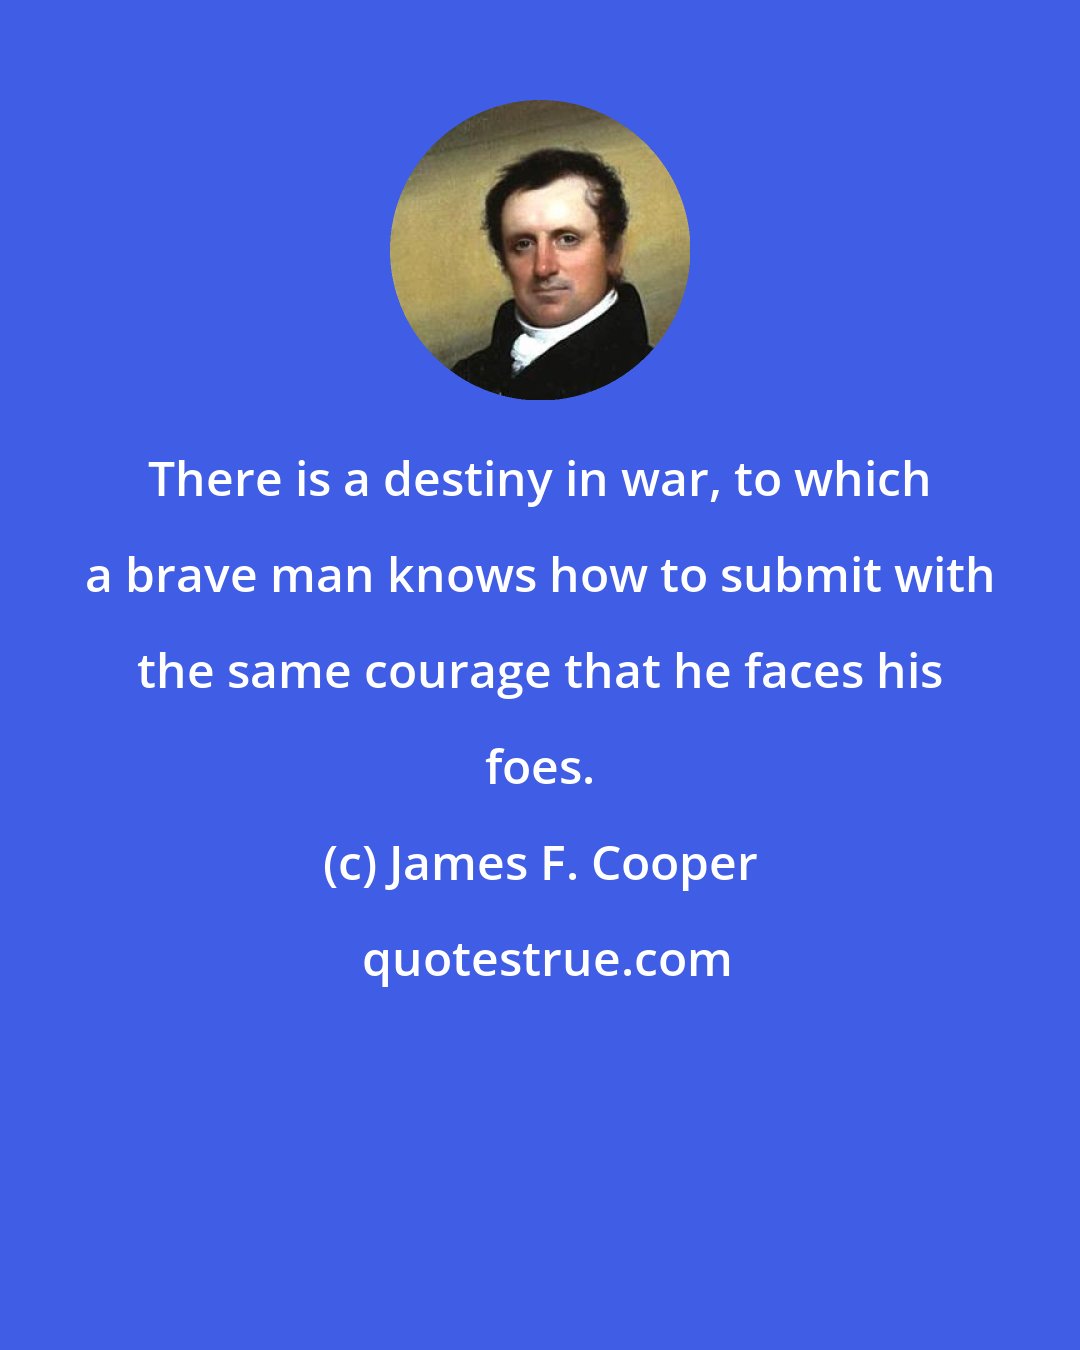 James F. Cooper: There is a destiny in war, to which a brave man knows how to submit with the same courage that he faces his foes.